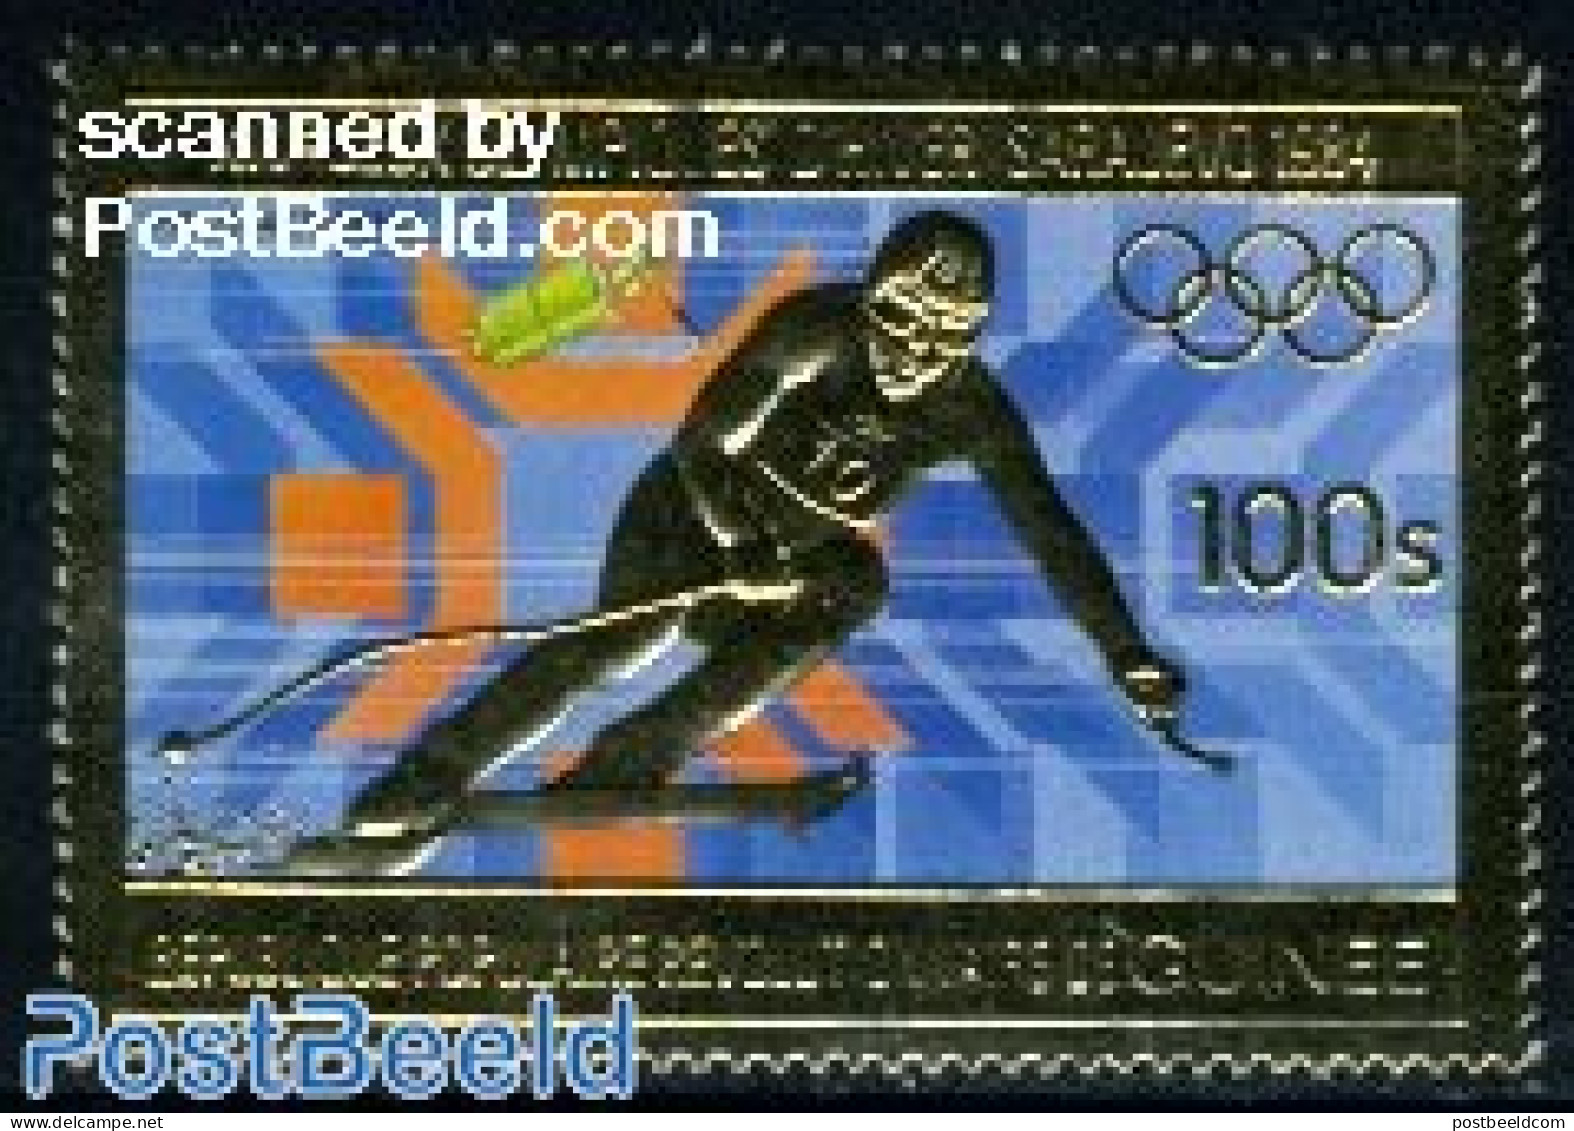 Guinea, Republic 1983 Olympic Winter Games 1v, Gold, Mint NH, Sport - Transport - Olympic Winter Games - Skiing - Spac.. - Skiing